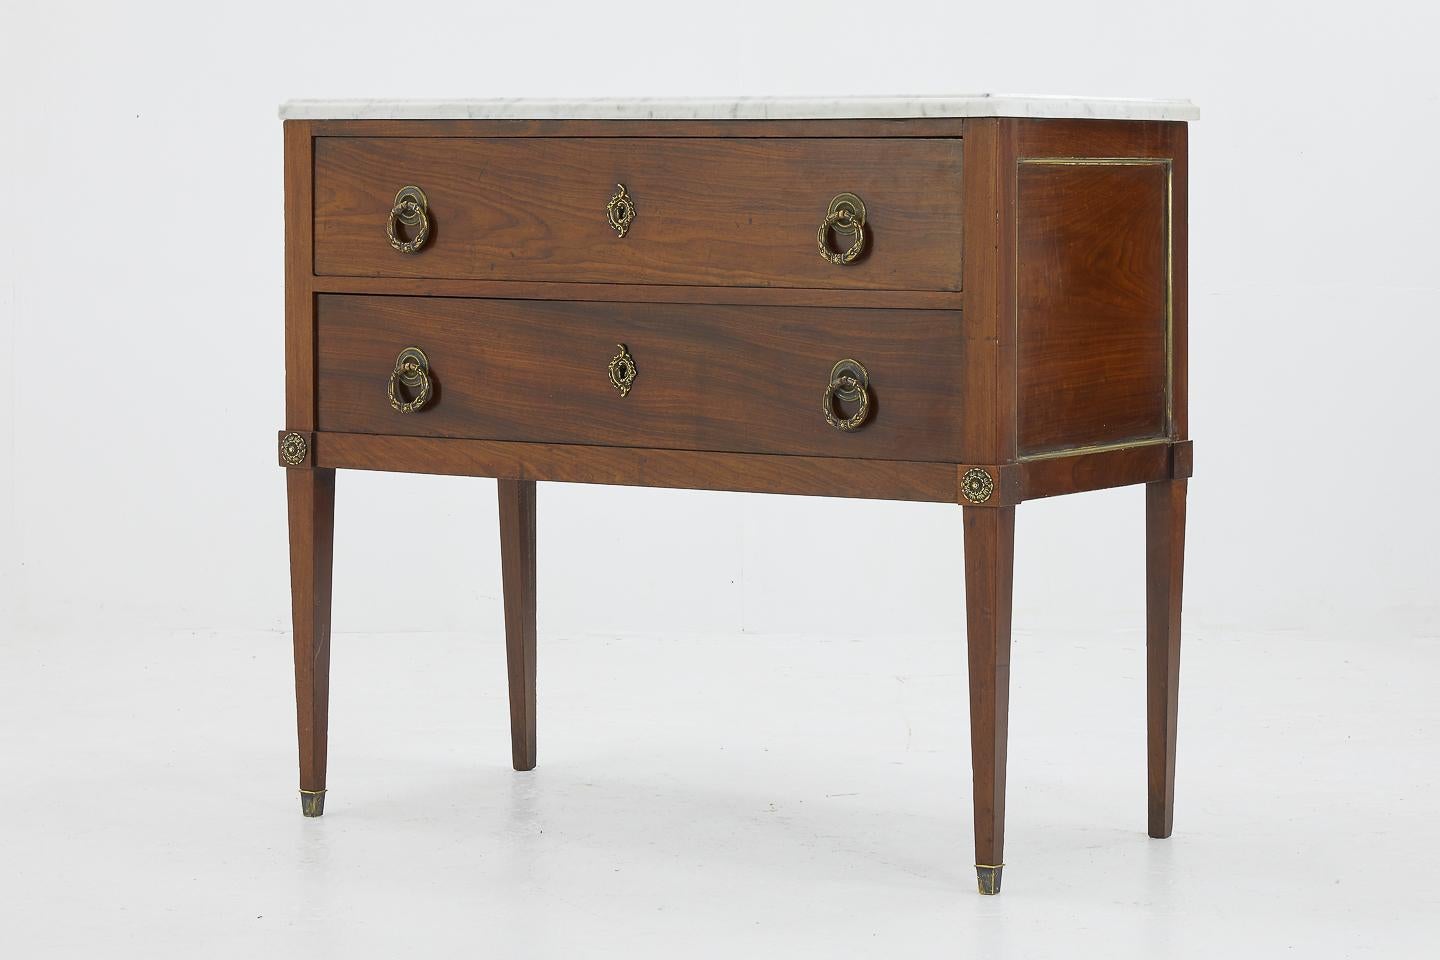 Petite early 19th century two-drawer French mahogany commode.

